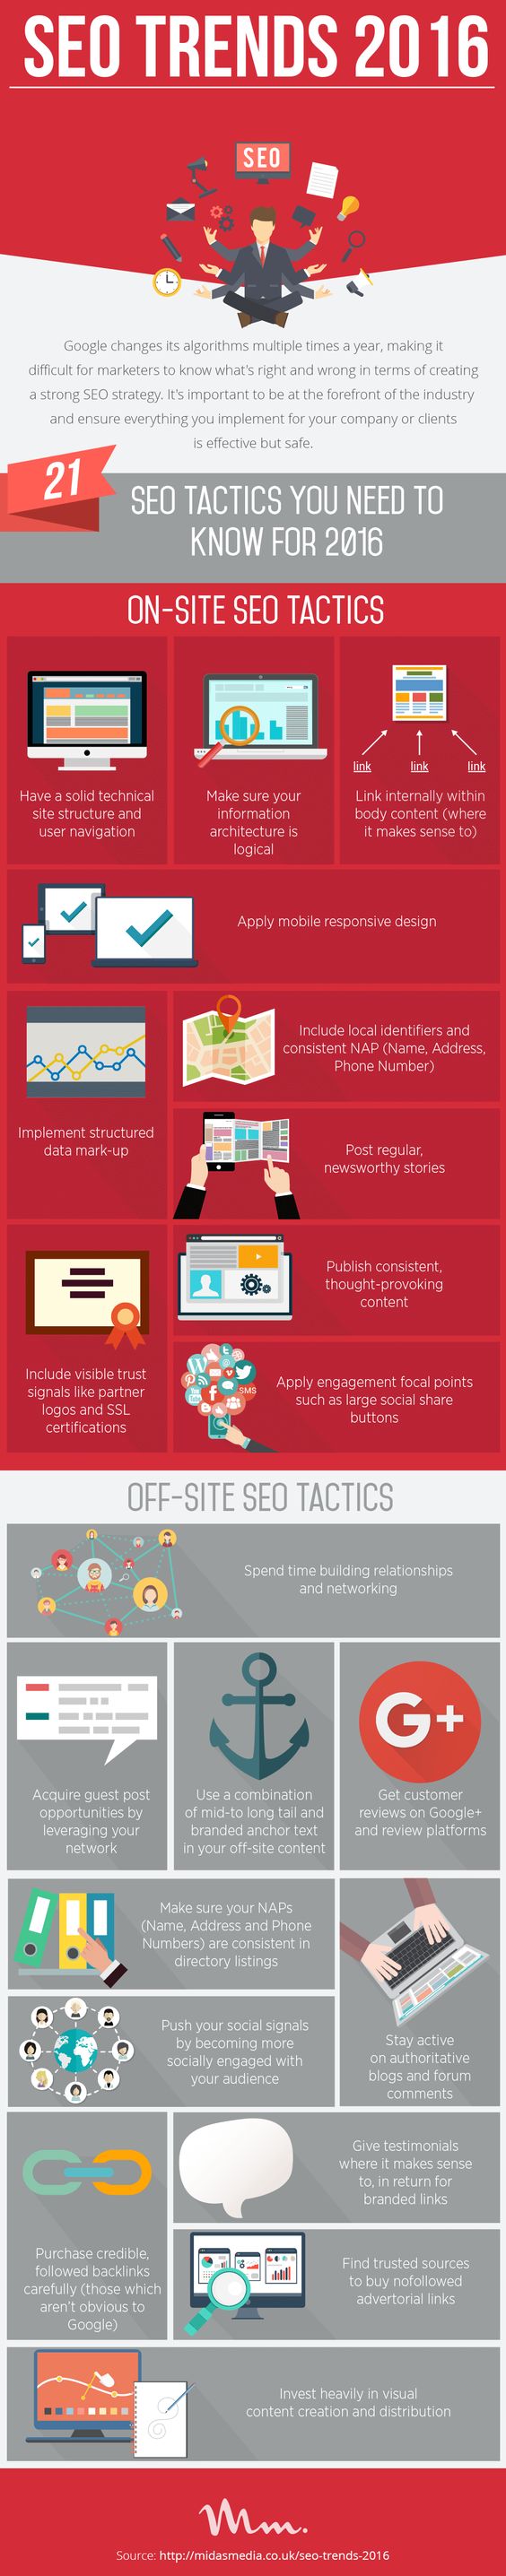 #Google changes its algorithm multiple times a year so it can get fairly confusing as to what #SEO tactics you need to employ or avoid. Here's the latest for 2016!